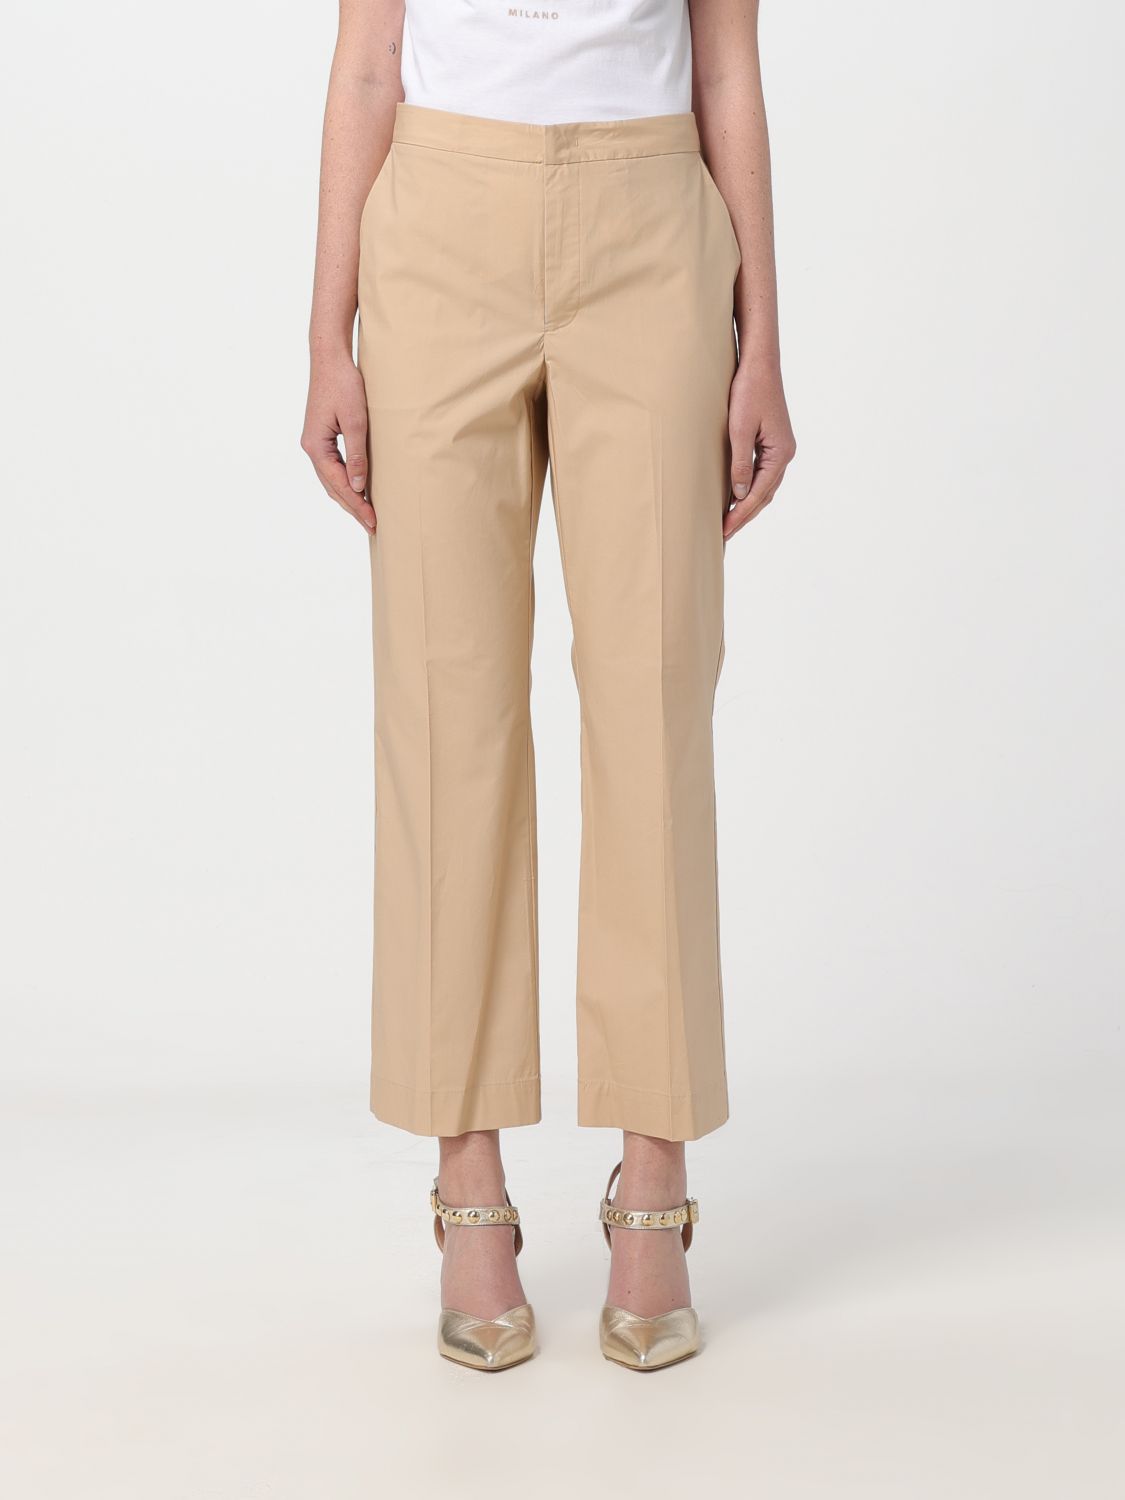 Twinset Pants TWINSET Woman color Cream